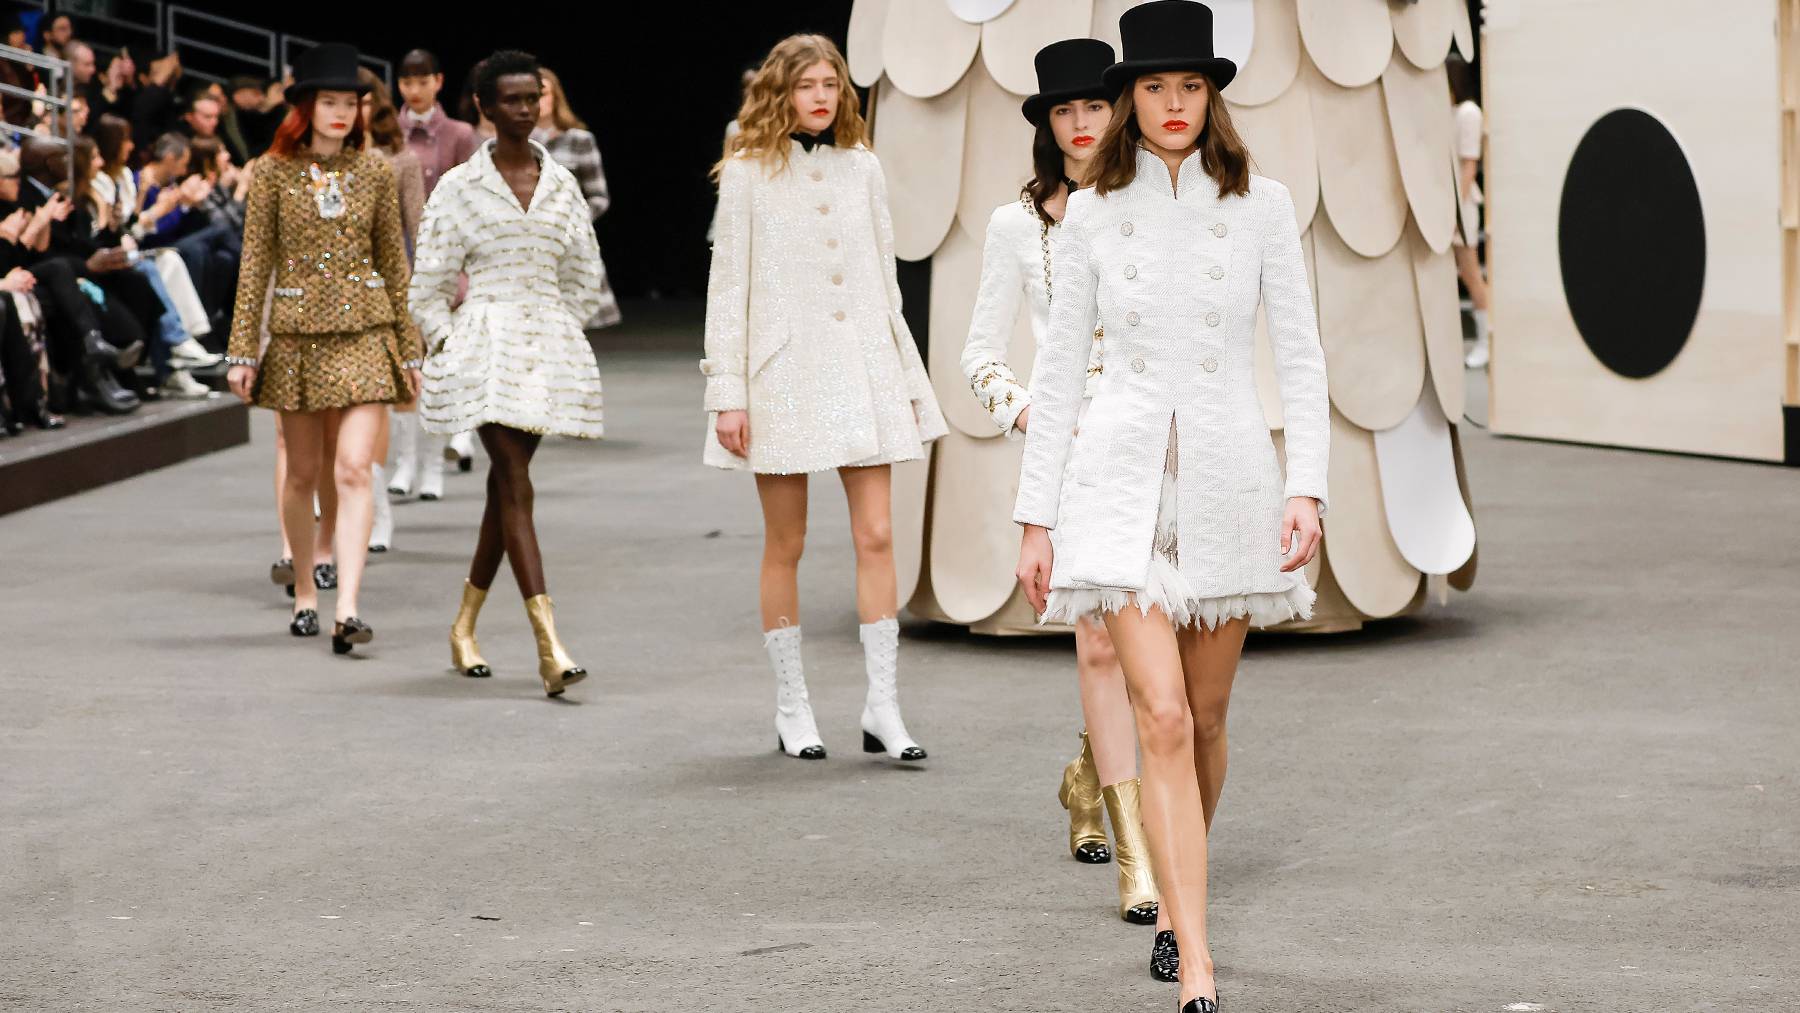 Models walk the runway at Chanel's Haute Couture show in Paris.